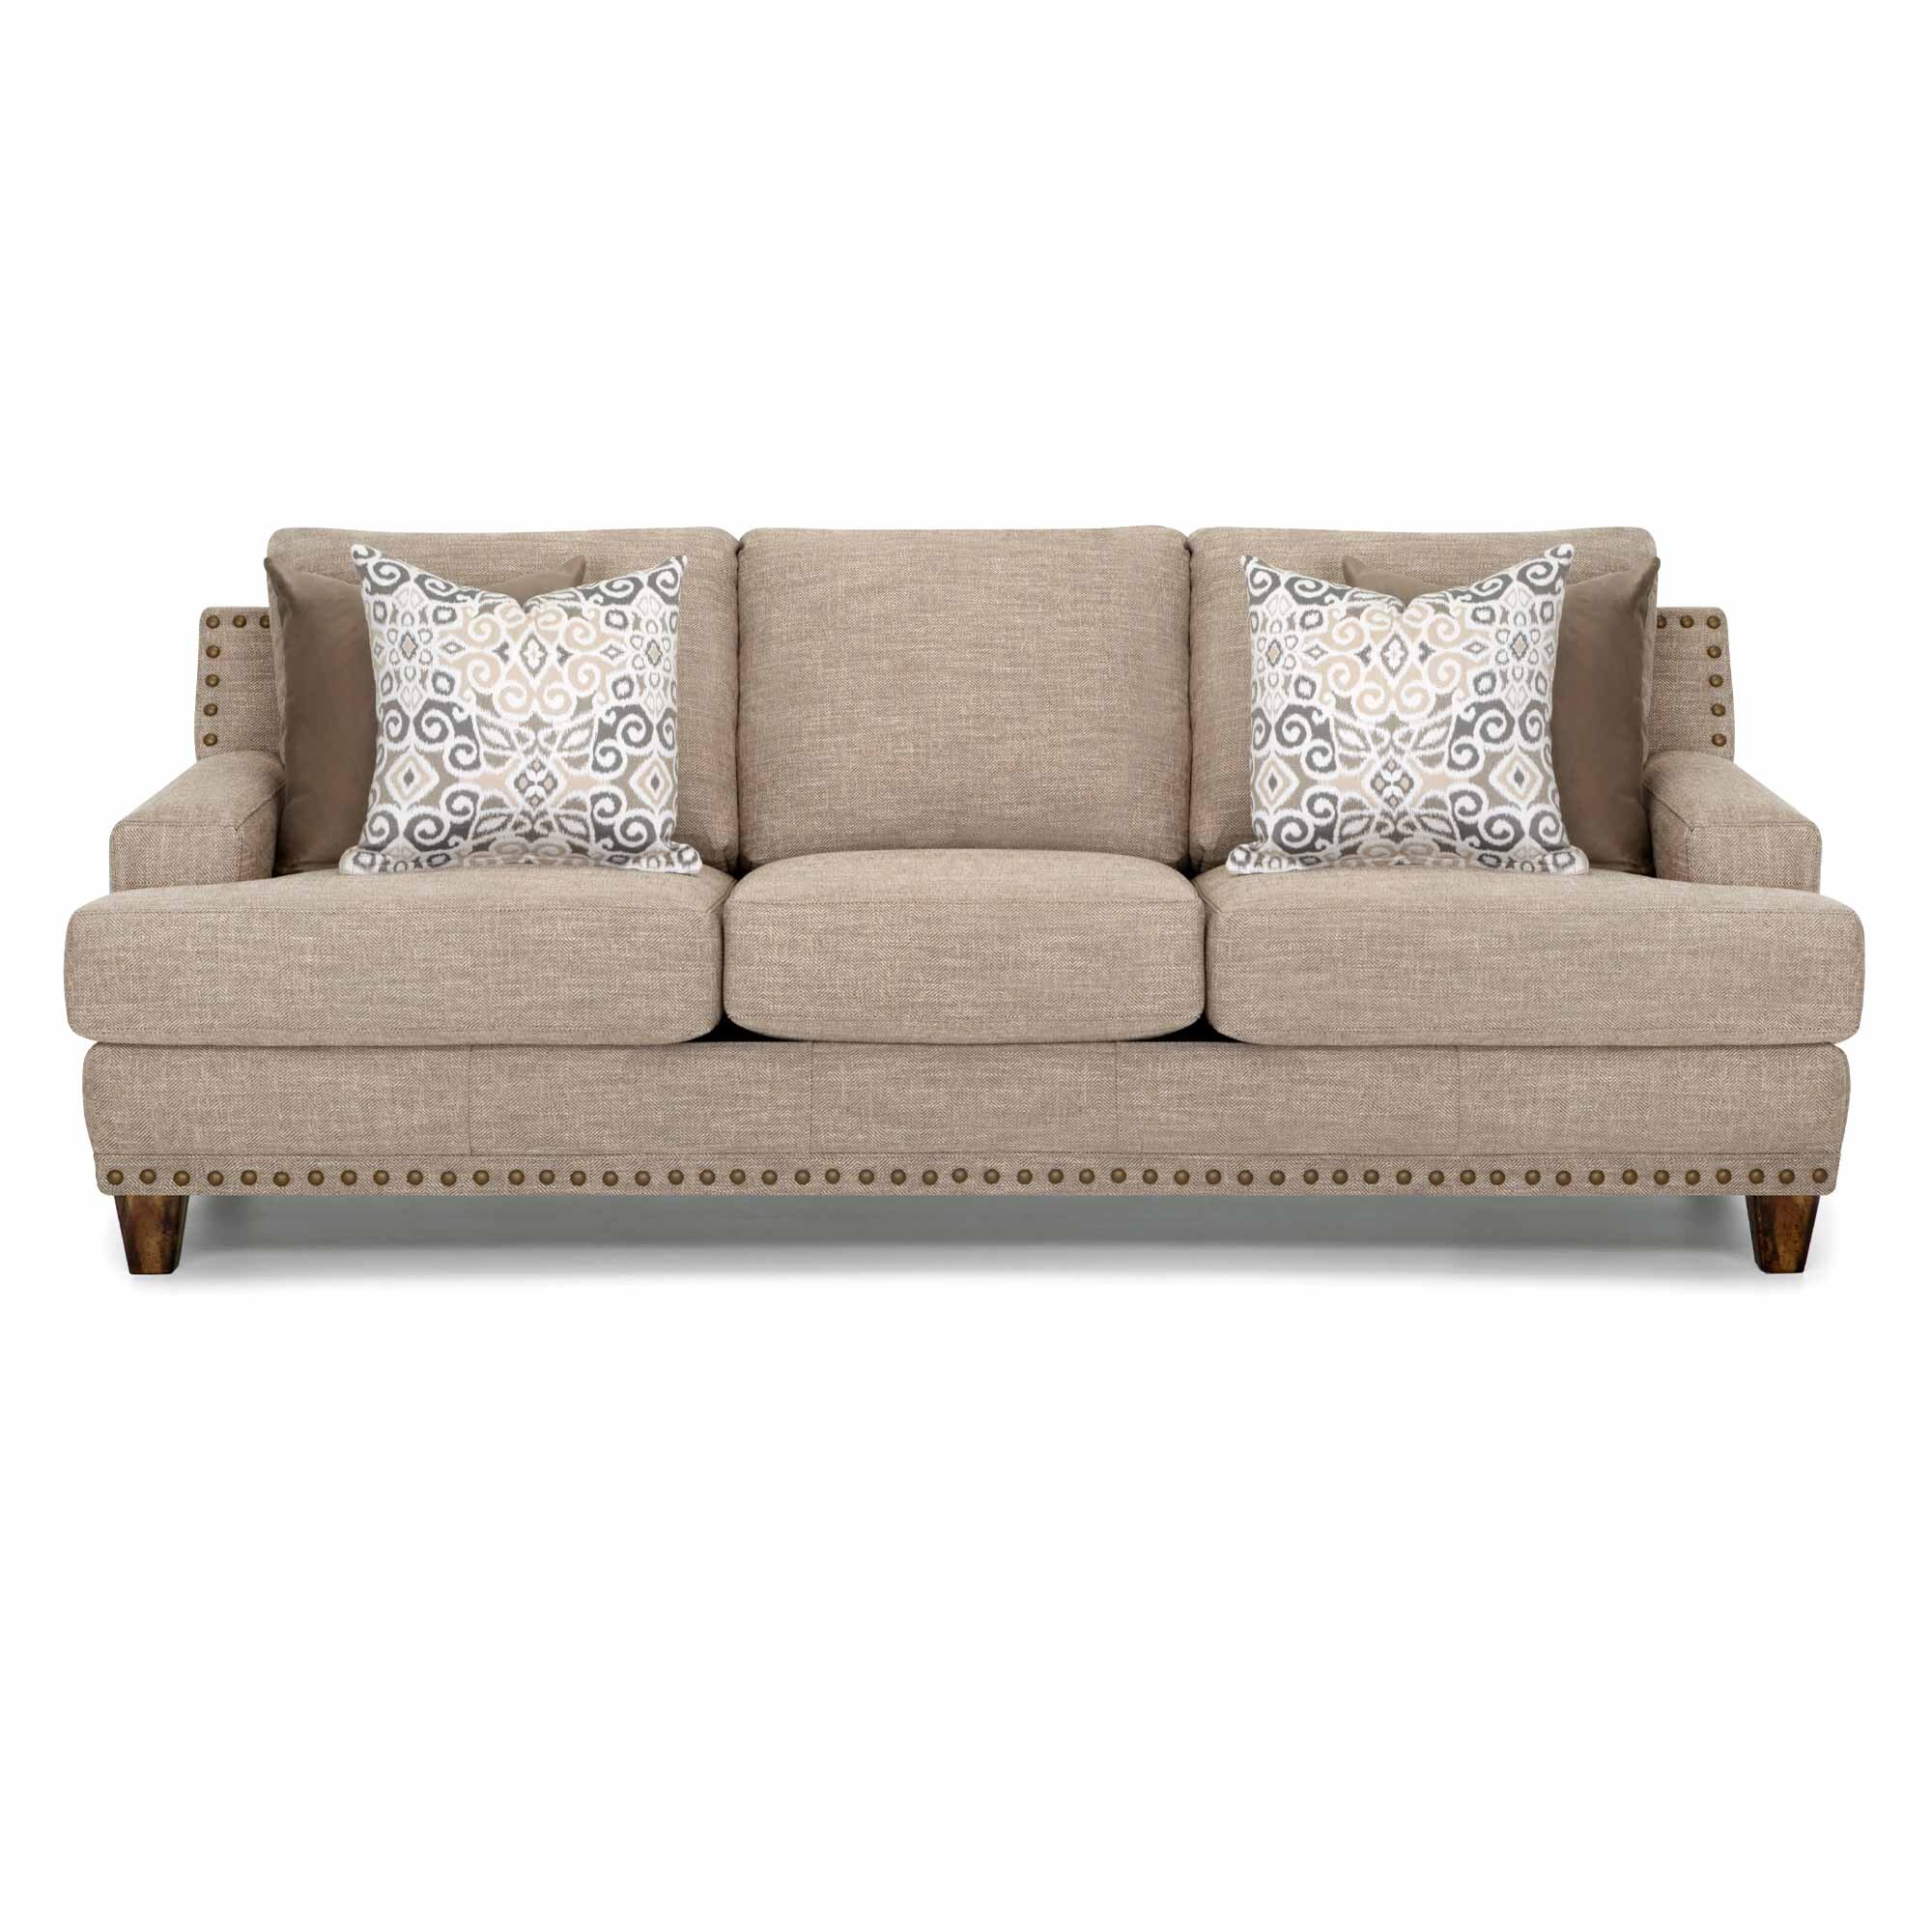 Datto 94” Sofa with Reversible Cushions